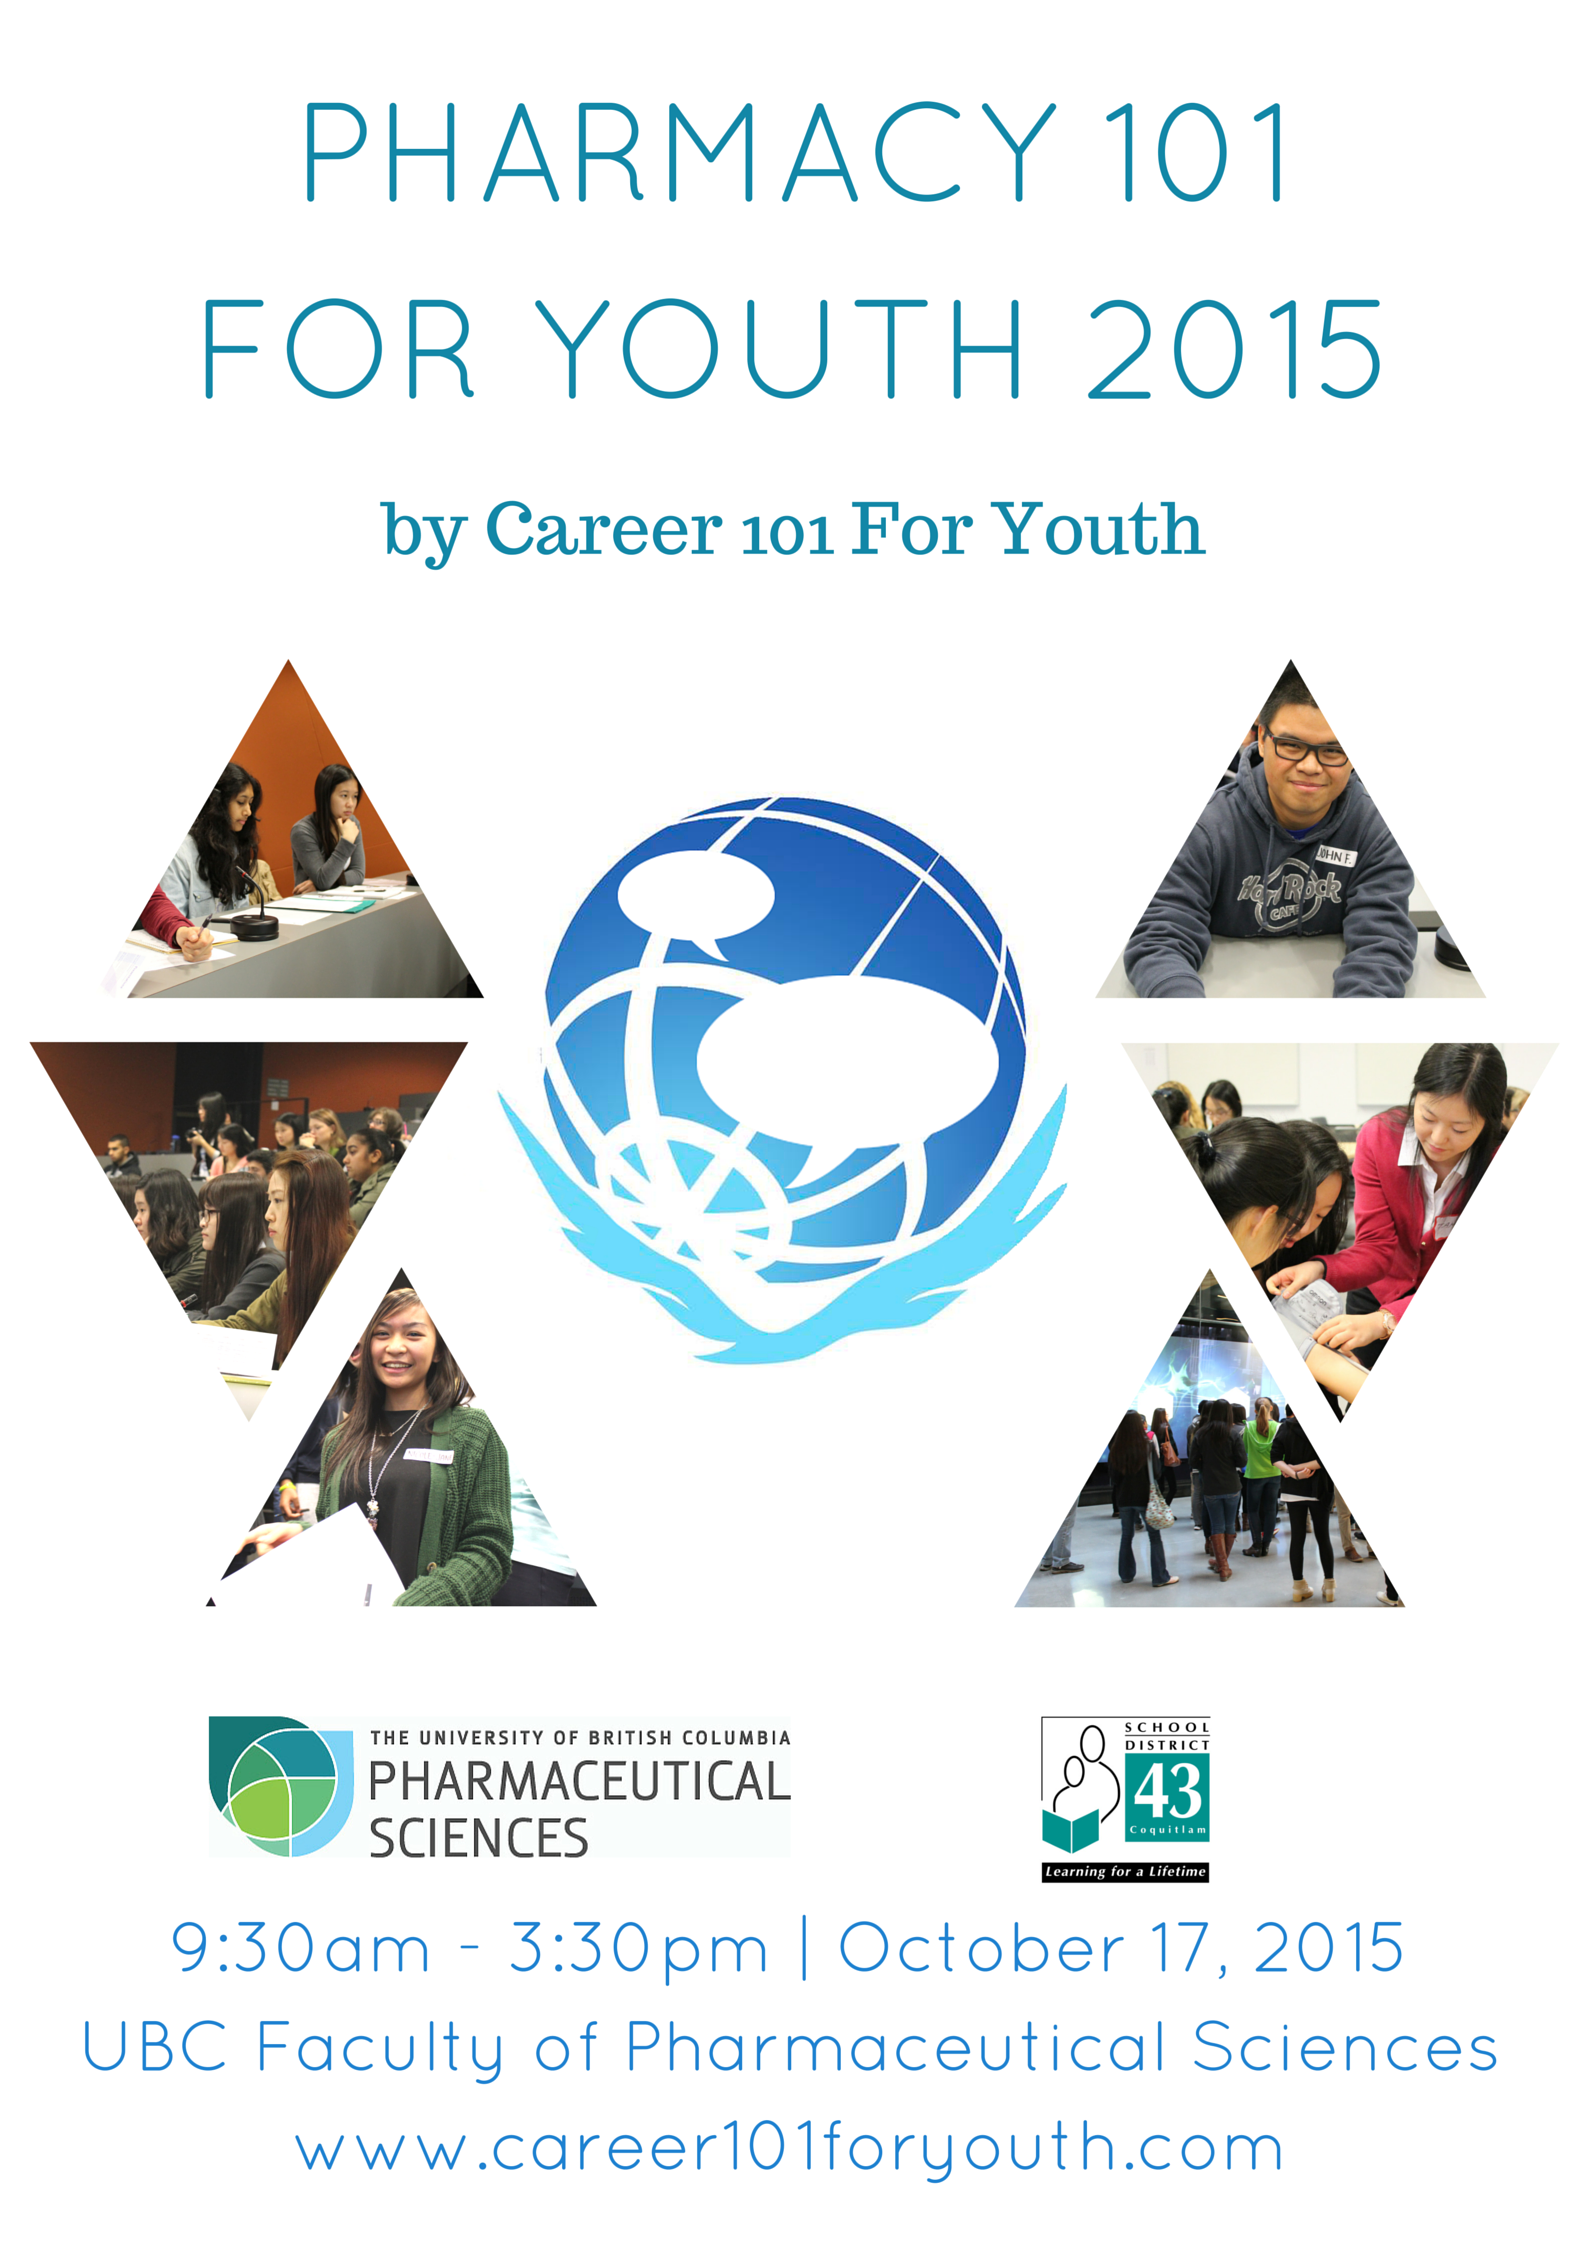 pharmacy-101-for-youth-2015-seycove-work-experience